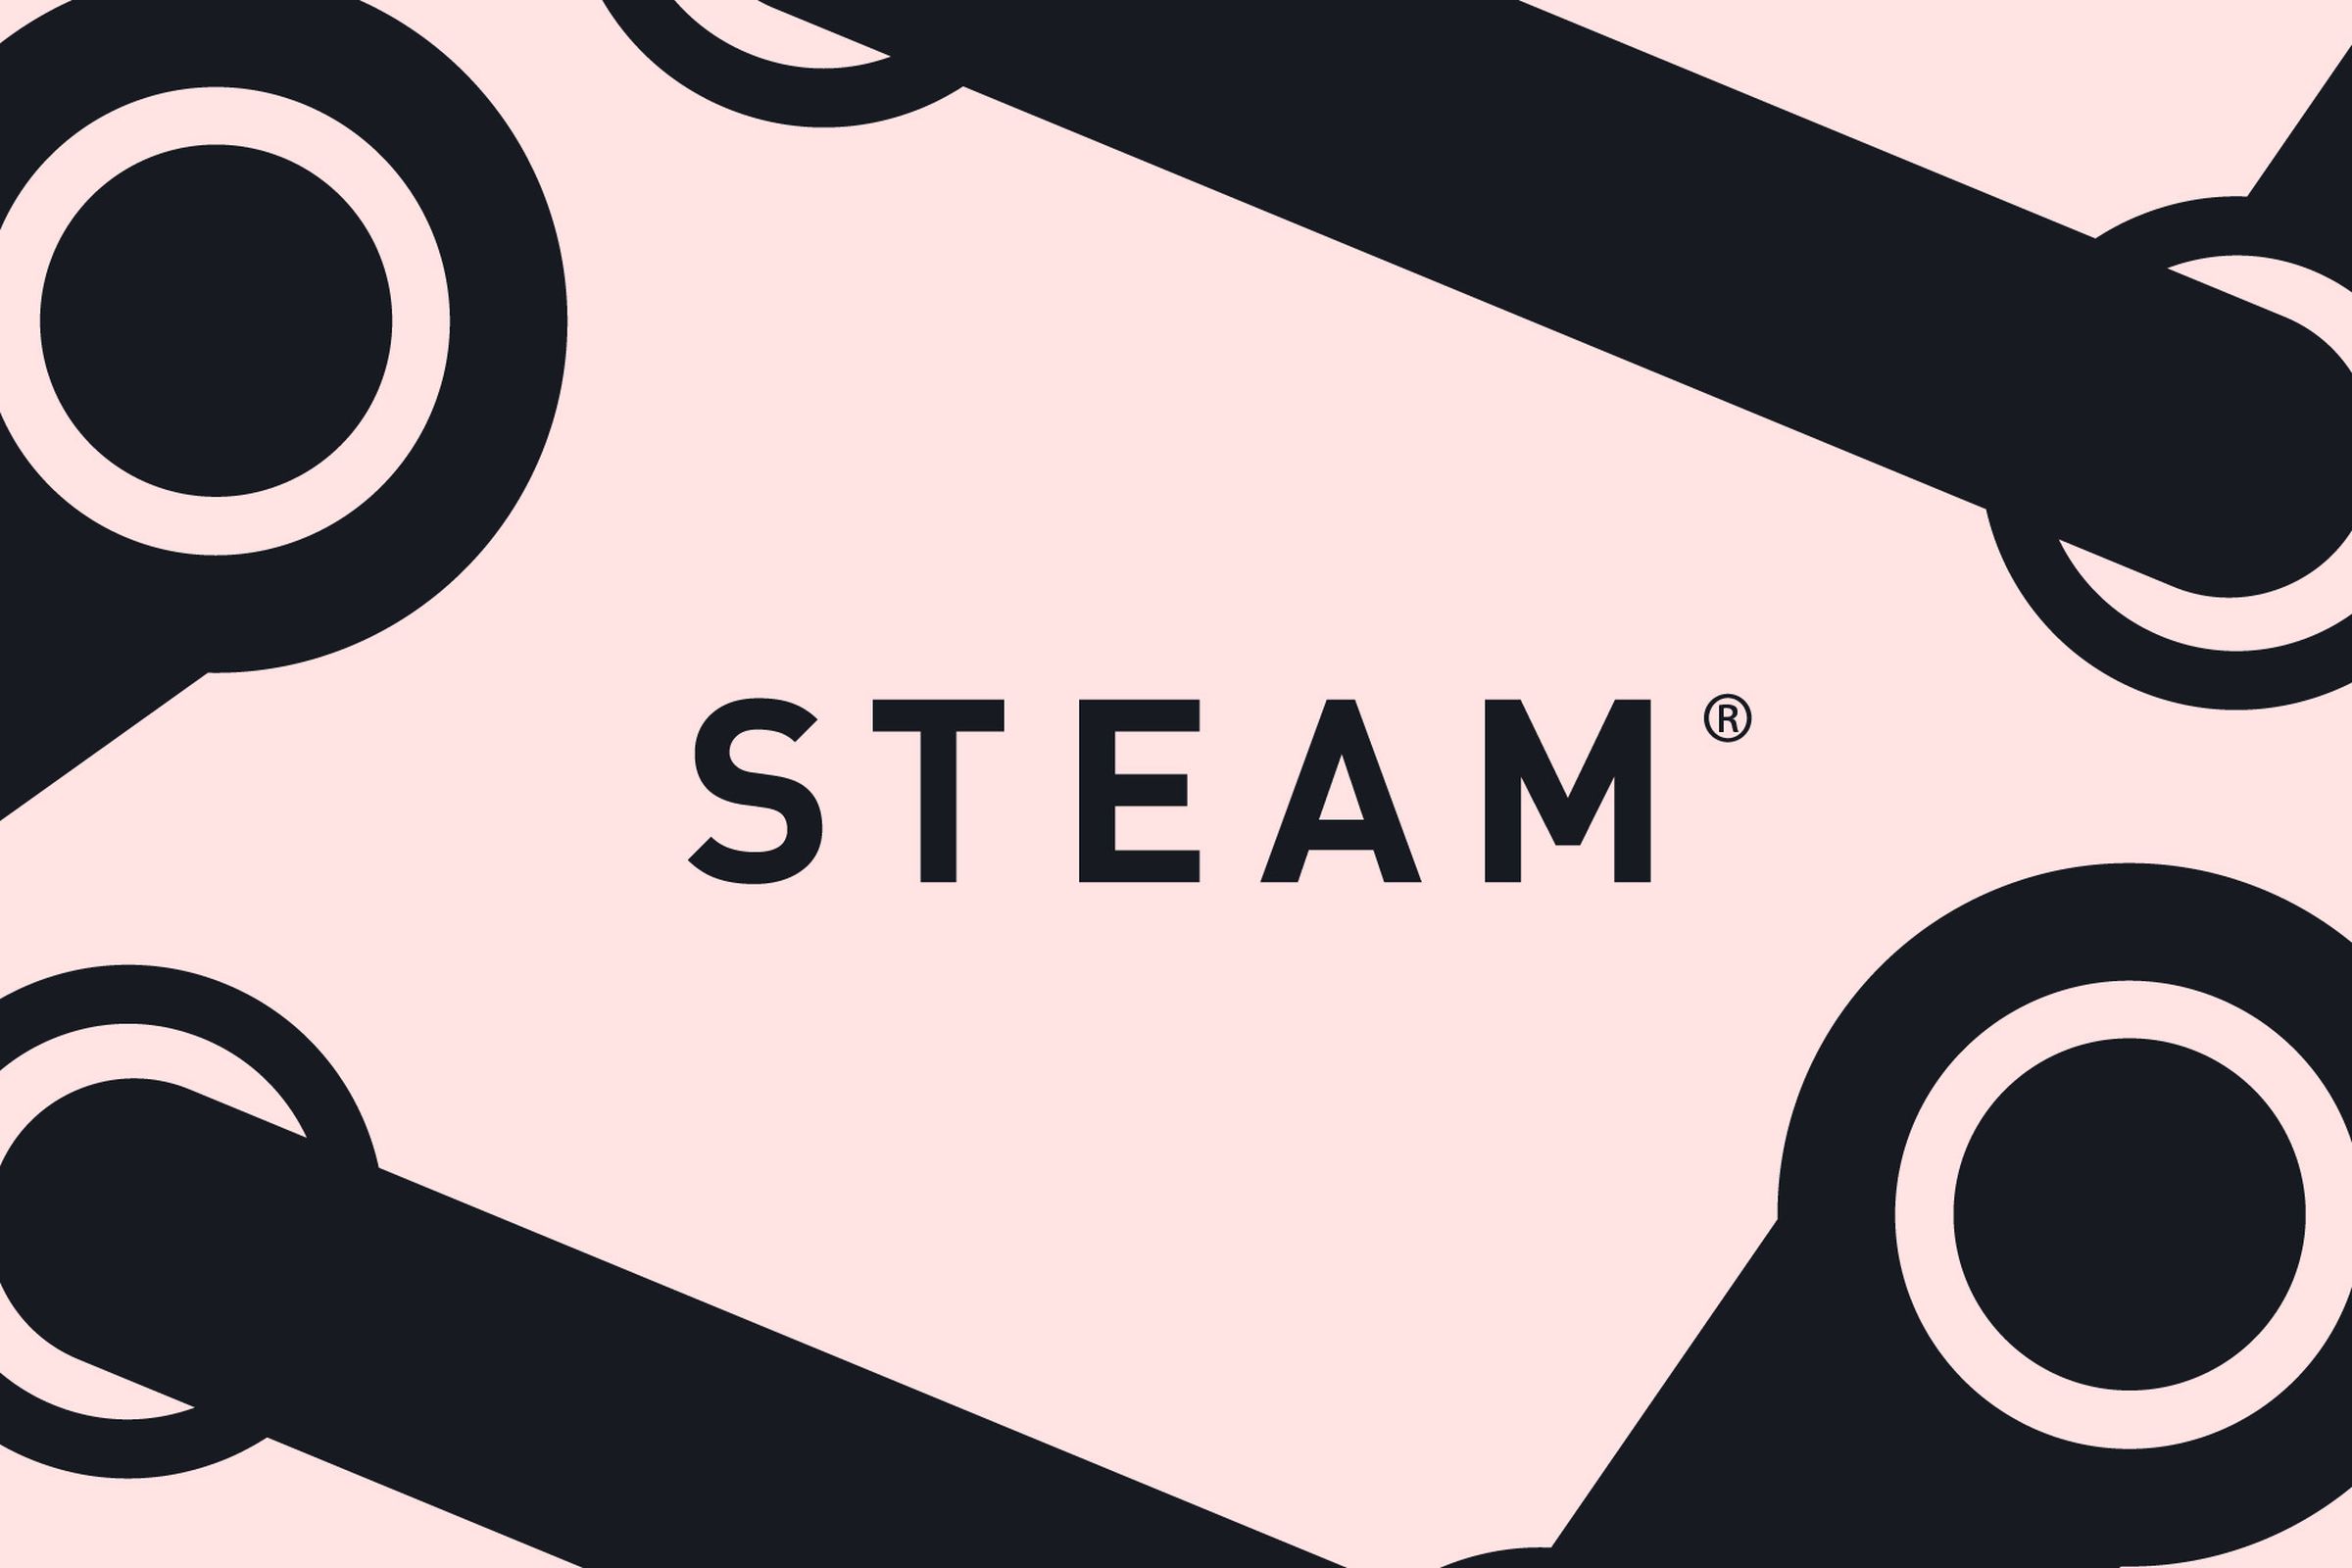 An illustration of the Steam logo.